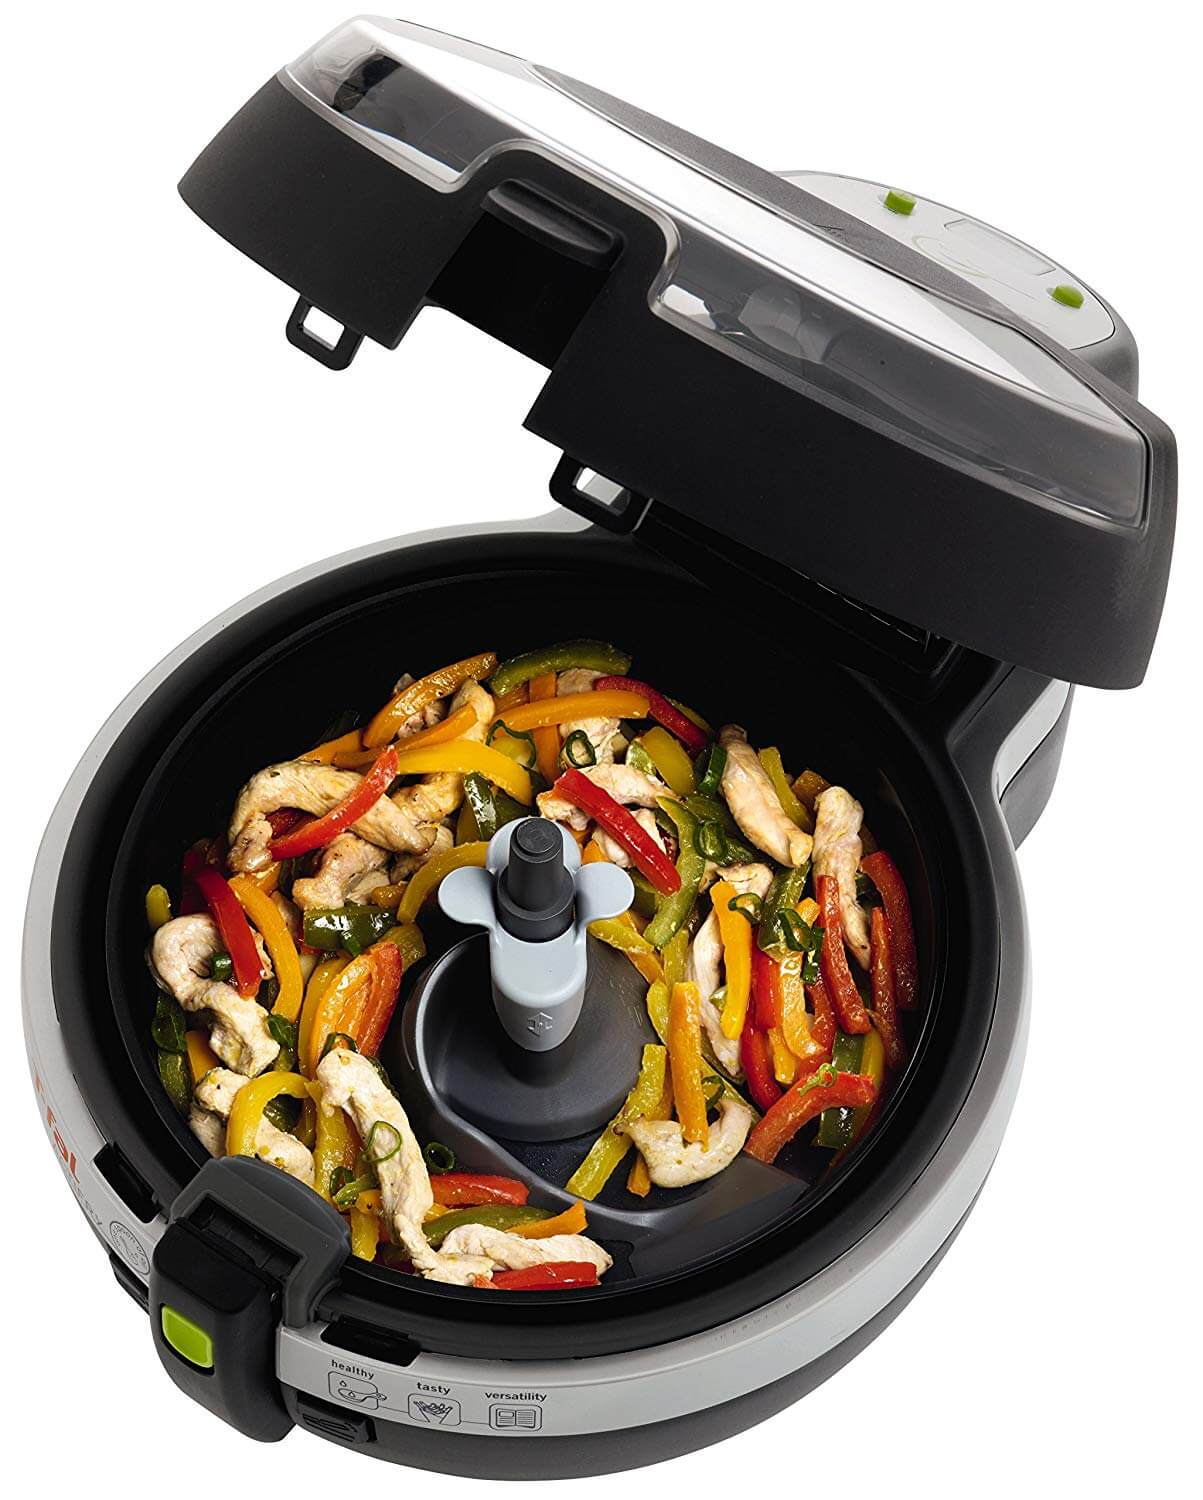 ActiFry Air Fryer – Oil-less electronic